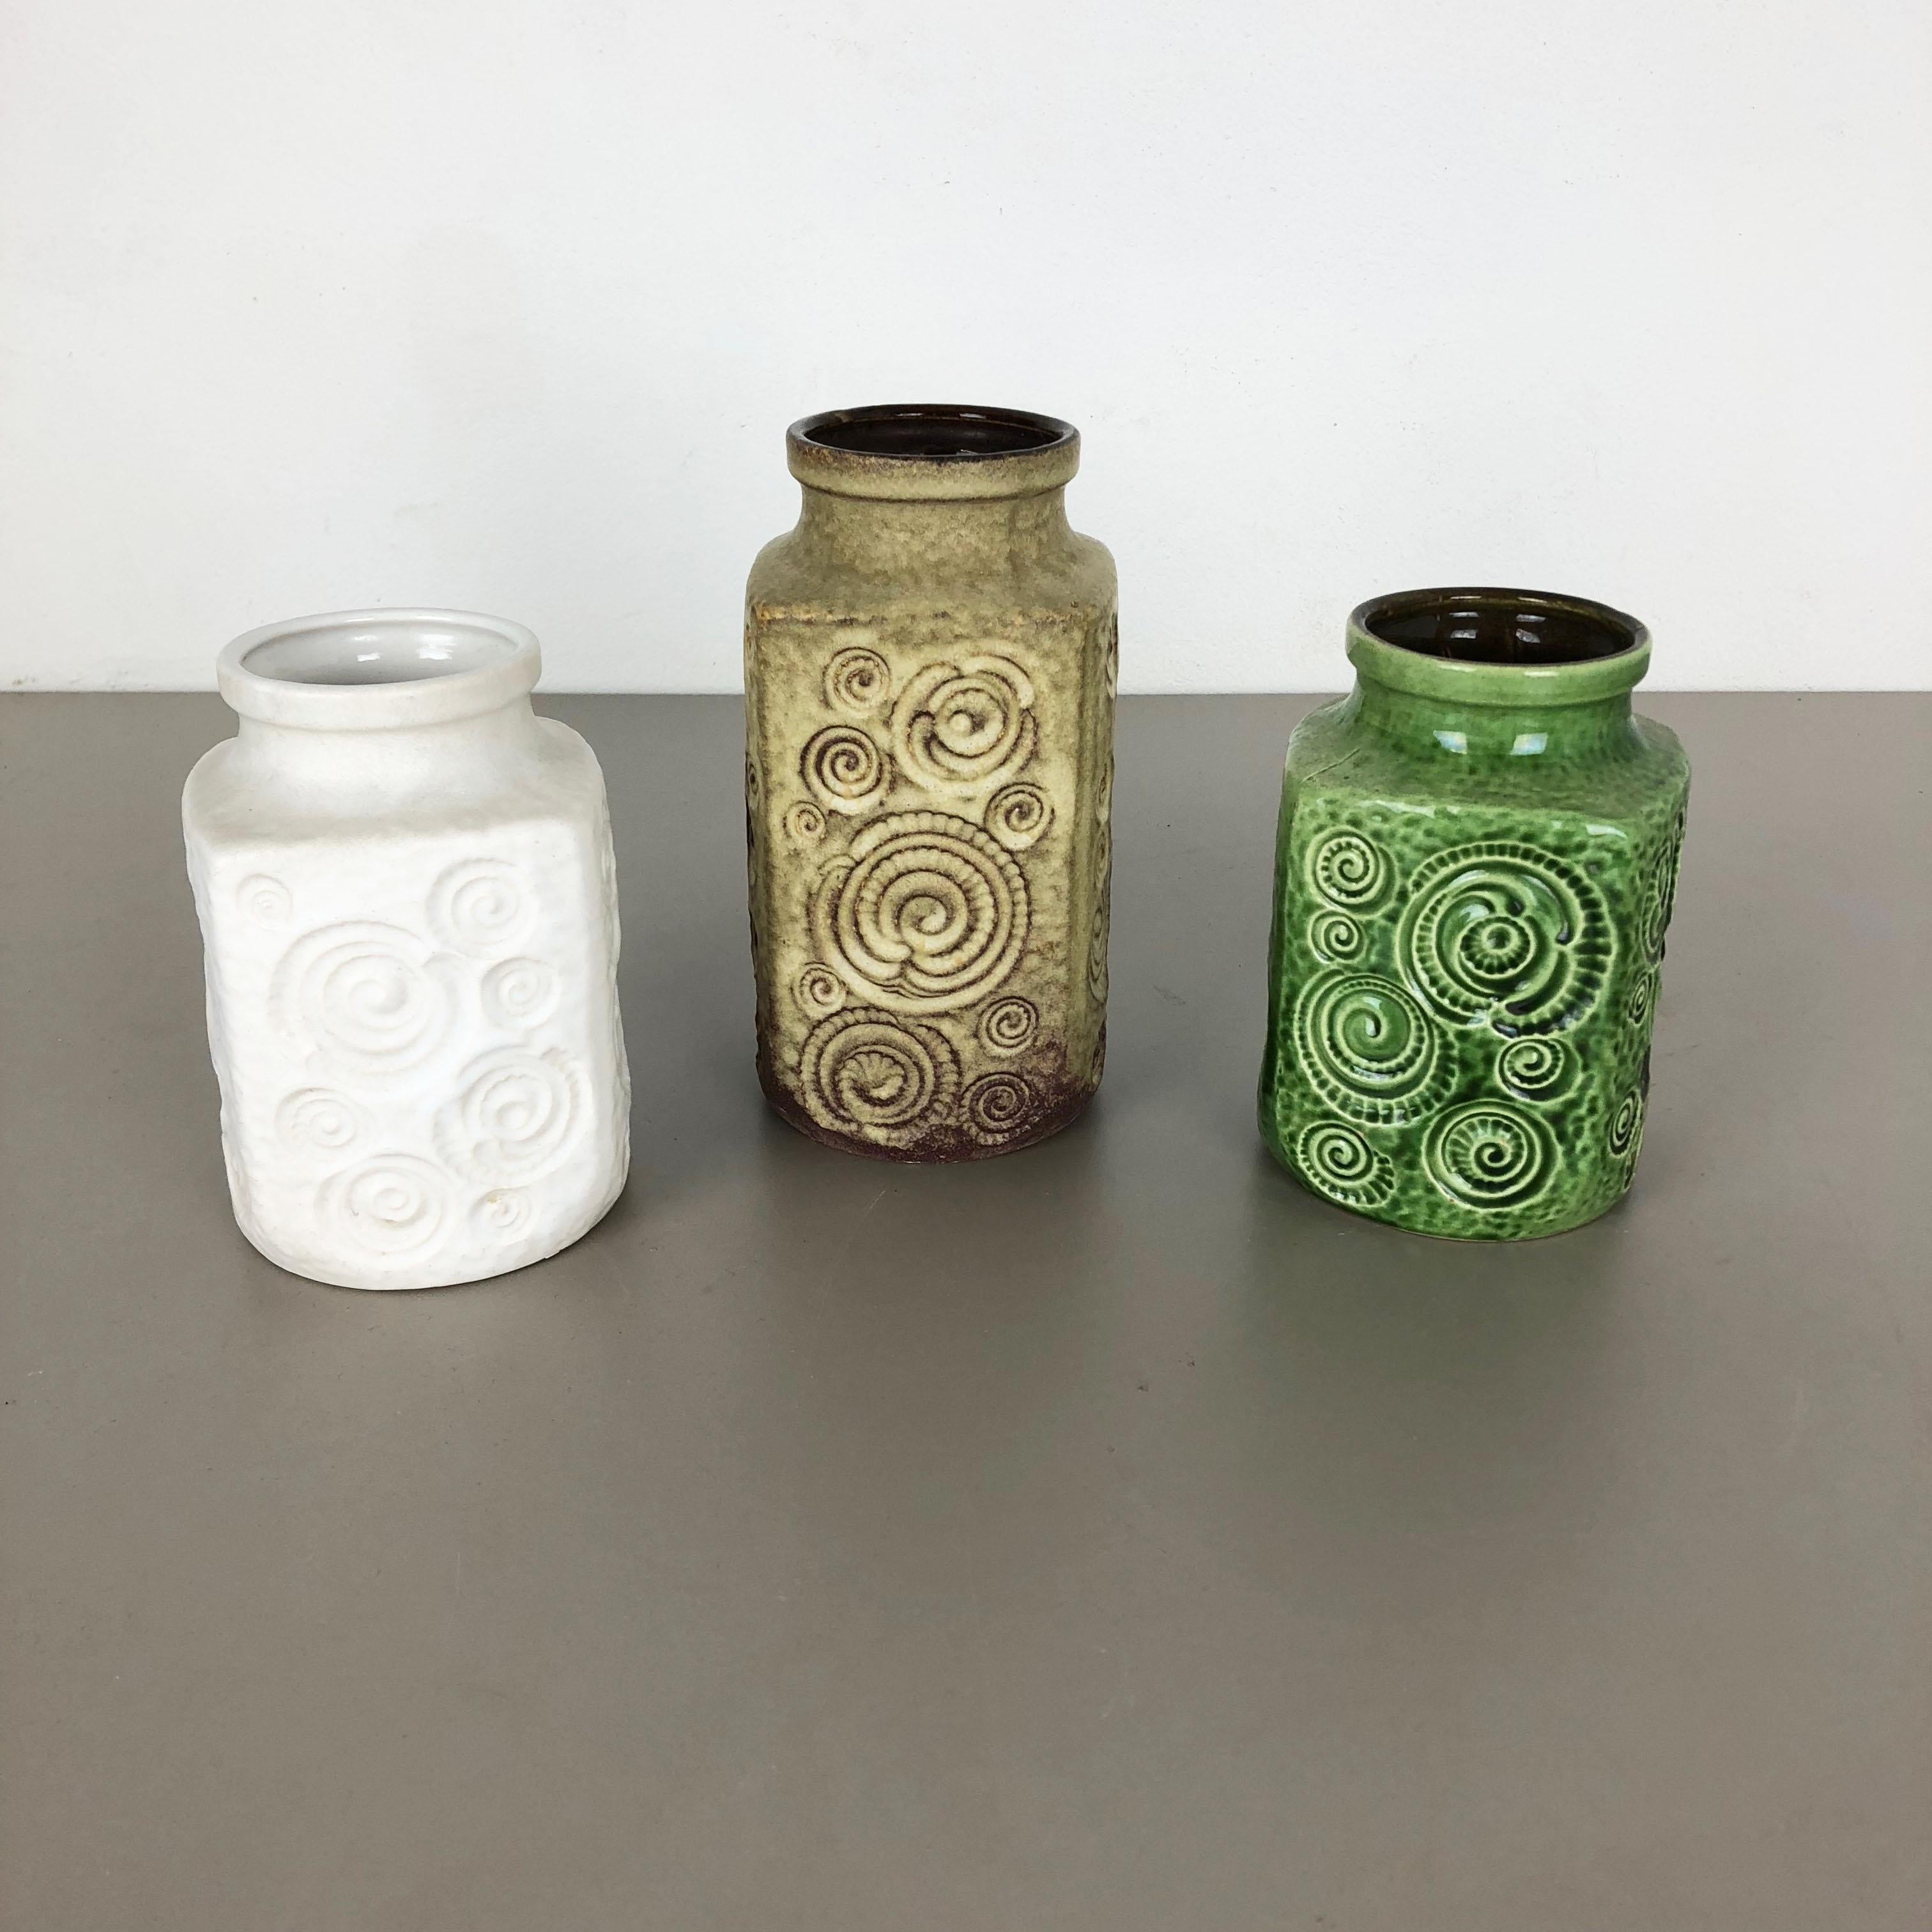 Article:

Set of three fat lava art vases

Model:
282-16
282-20



Producer:

Scheurich, Germany



Decade:

1970s




These original vintage vases was produced in the 1970s in Germany. It is made of ceramic pottery in fat